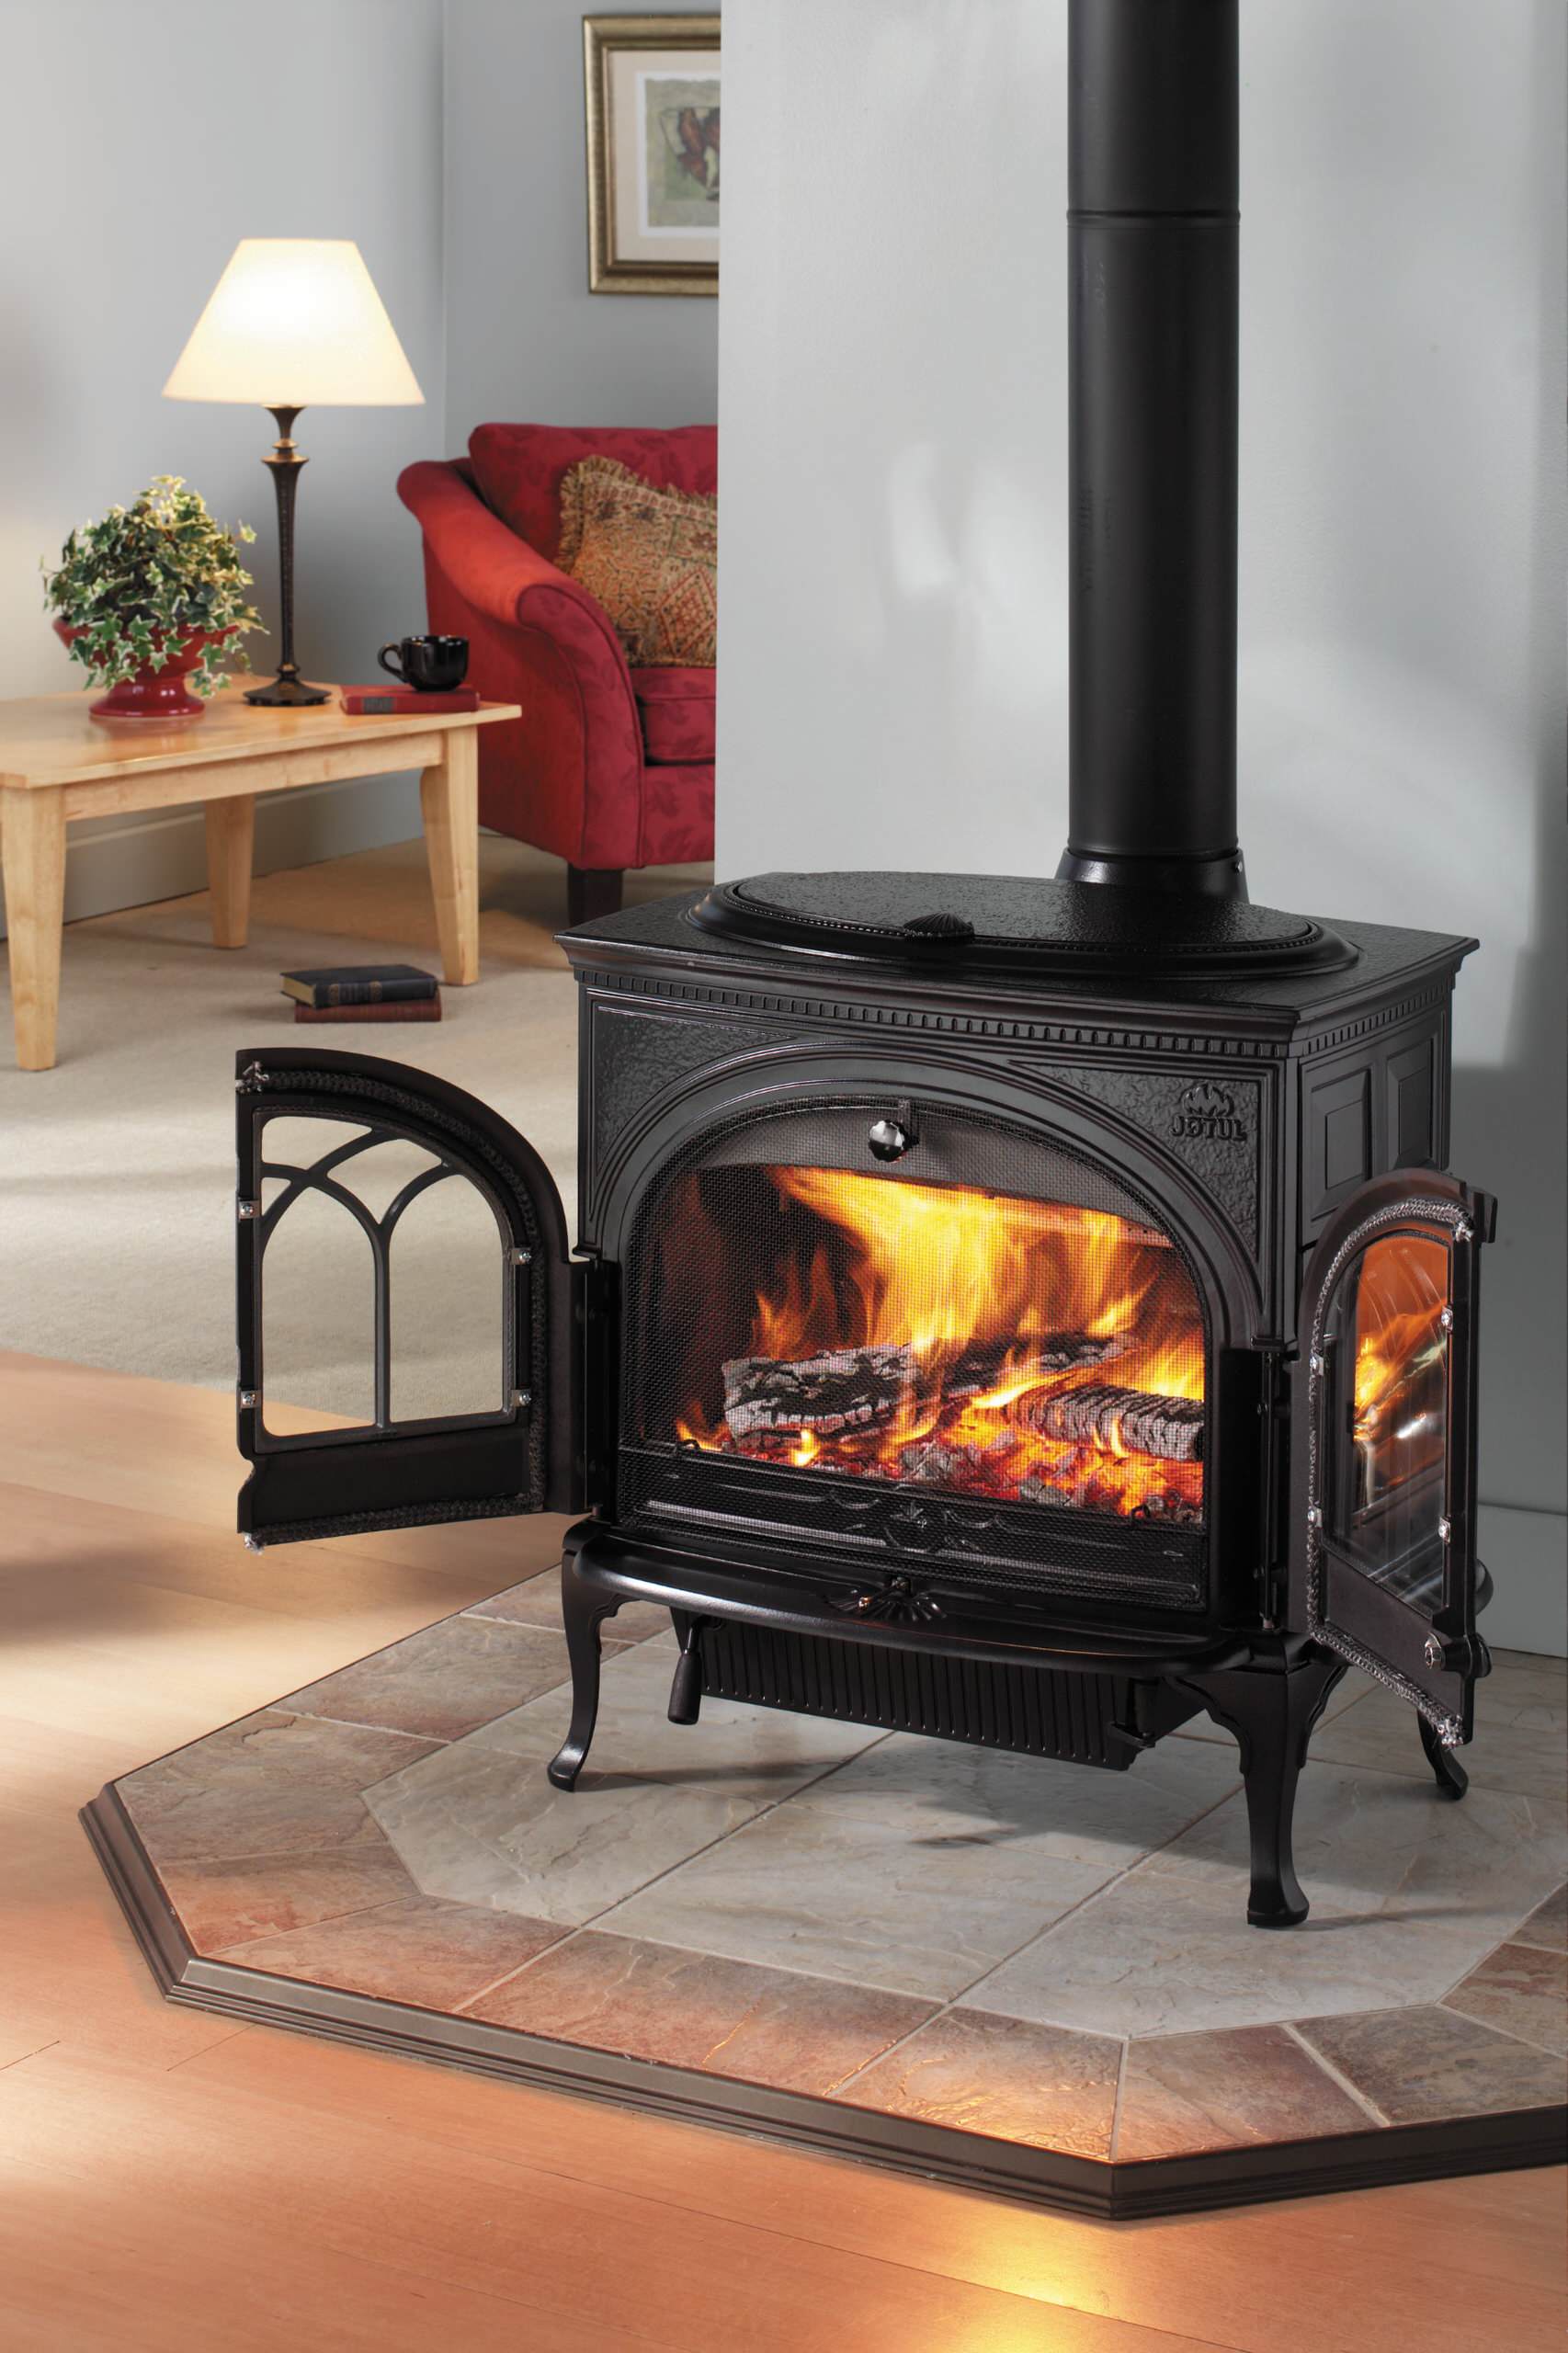 Image Of Square Cast Iron Woodburner Contemporary Log Wood Burning Stove  Fireplace Mantle With Orange Fire Flames Burning And Generating Heat To  Warm Up Room Instead Of Gas Boiler Central Heating Modern